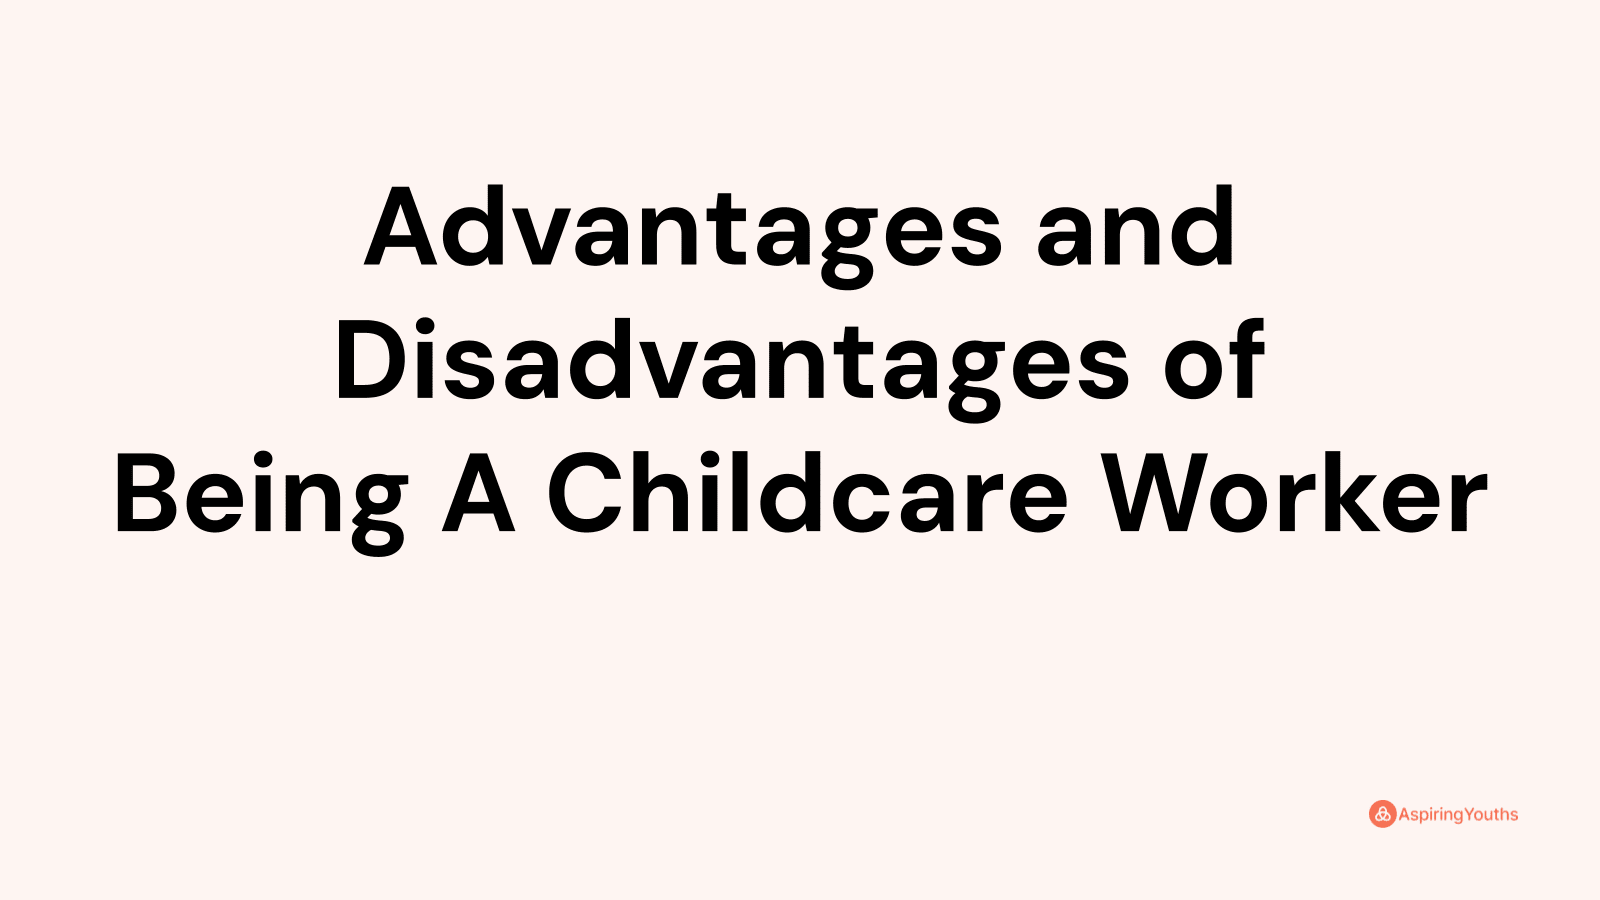 Advantages and disadvantages of Being A Childcare Worker